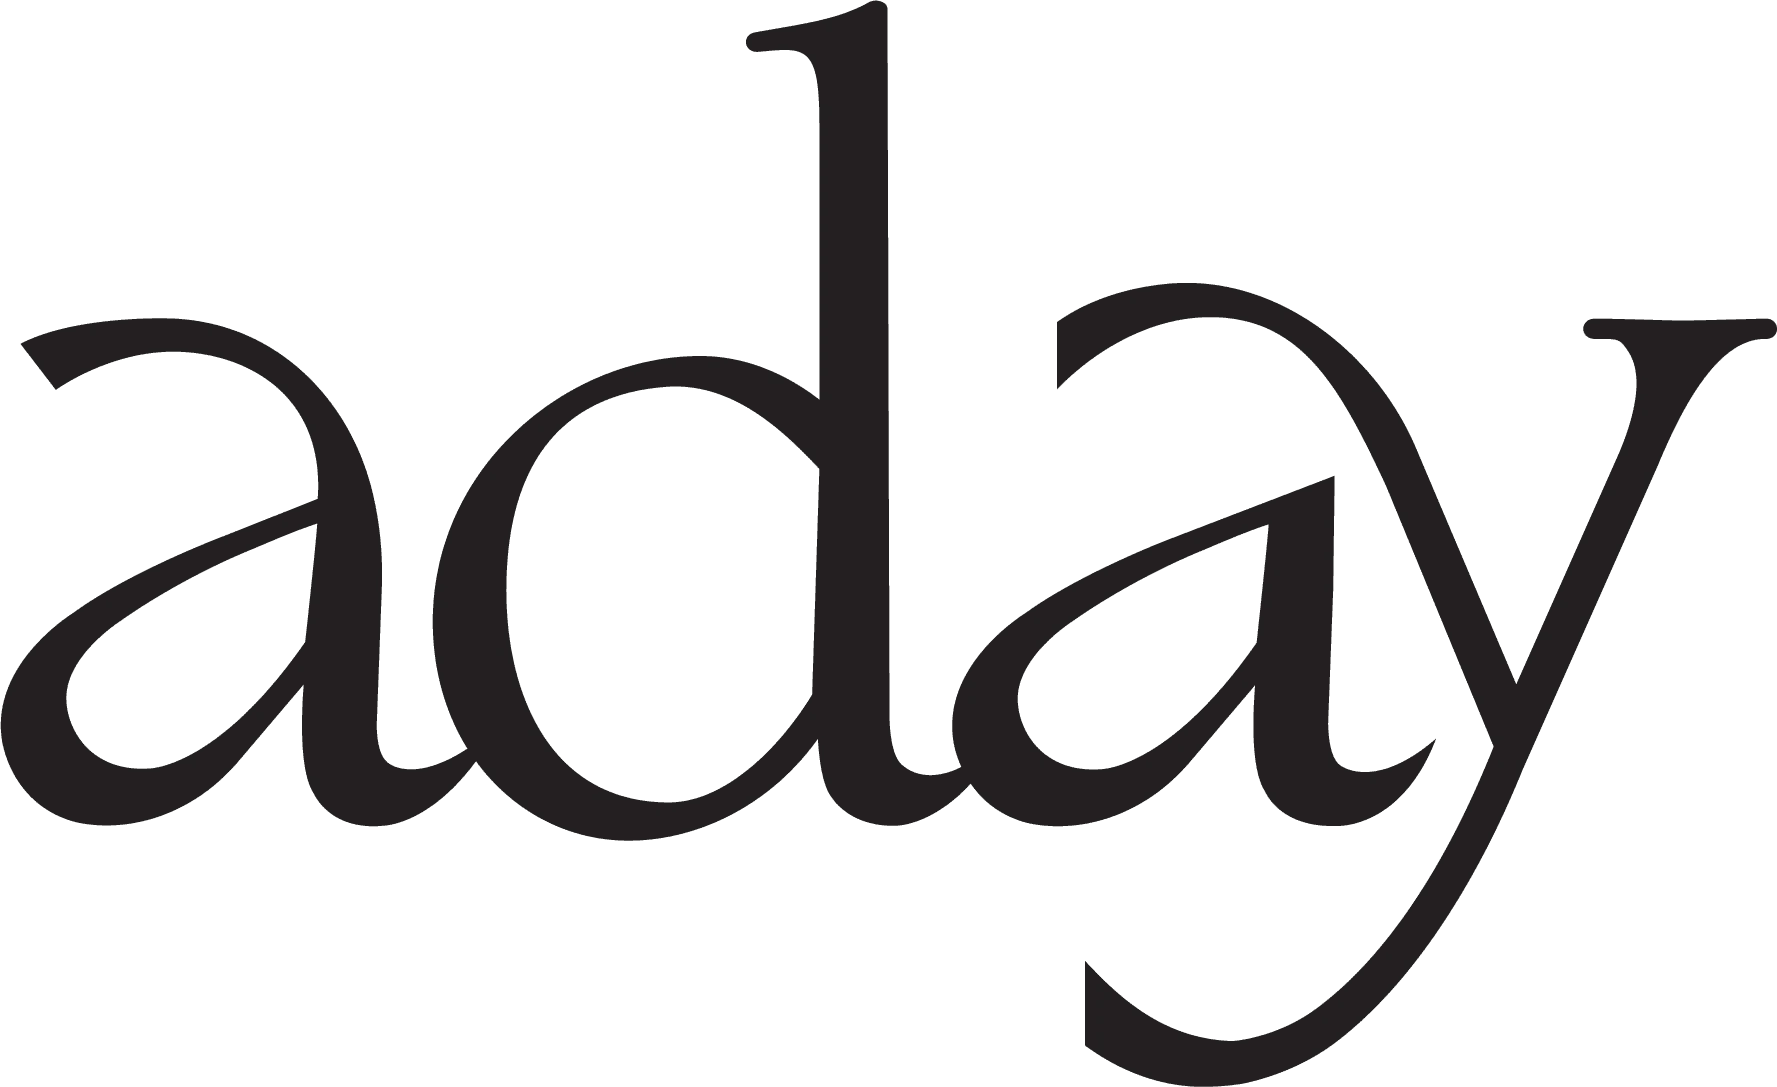 A sustainable fashion brand, aday's logo is recognized by the top 50 influencers.